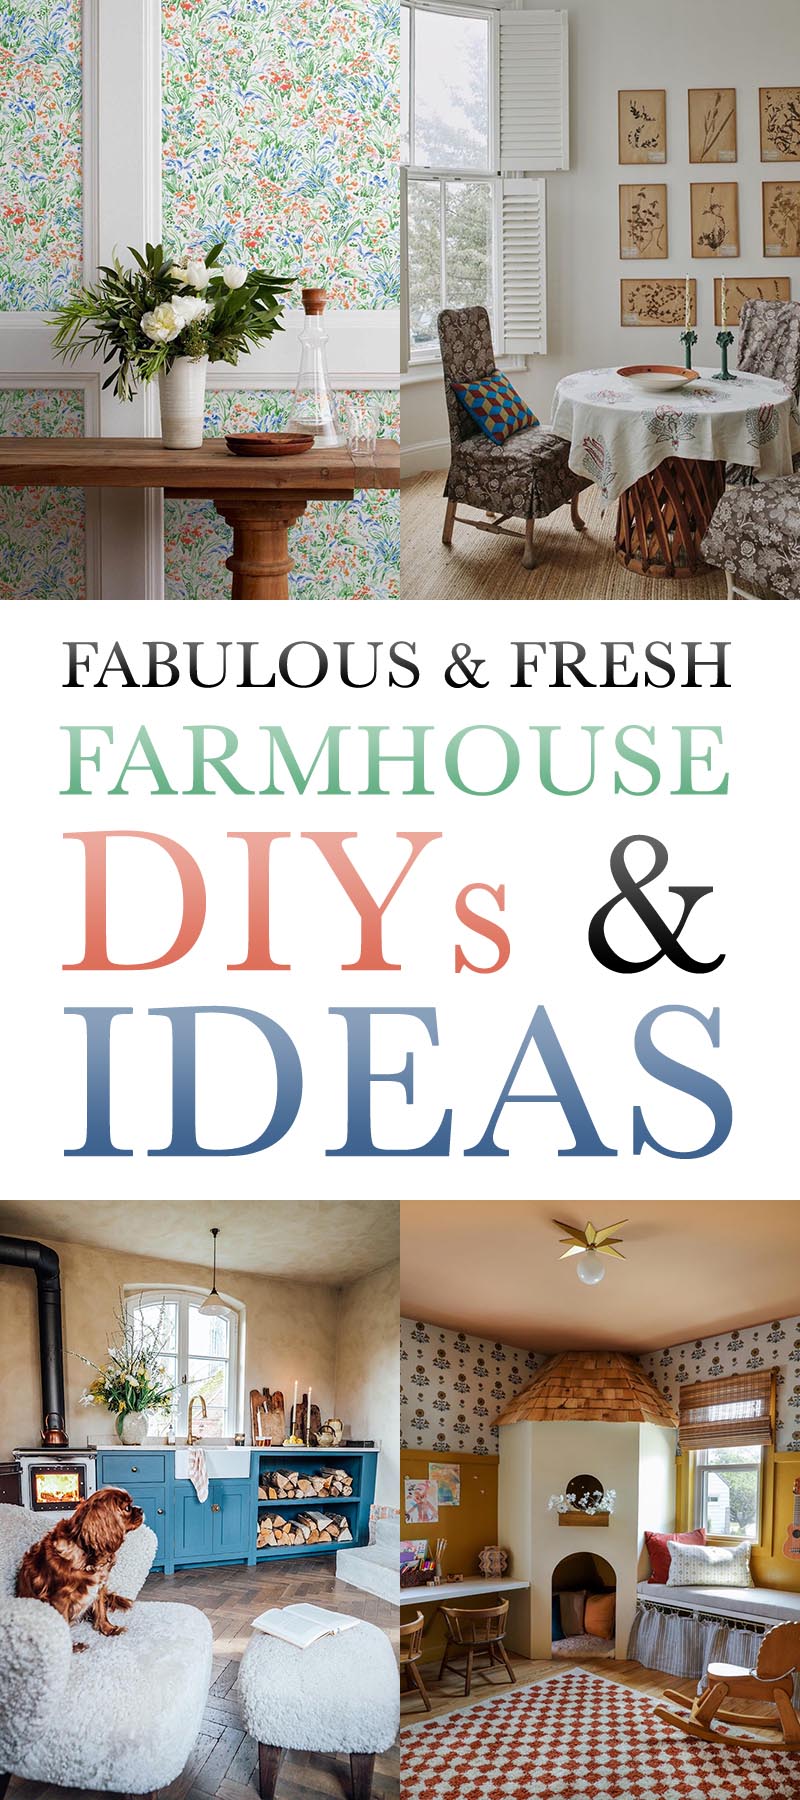 Explore 27 fabulous Farmhouse DIYs and Ideas to transform your home into a cozy haven of rustic charm and style.